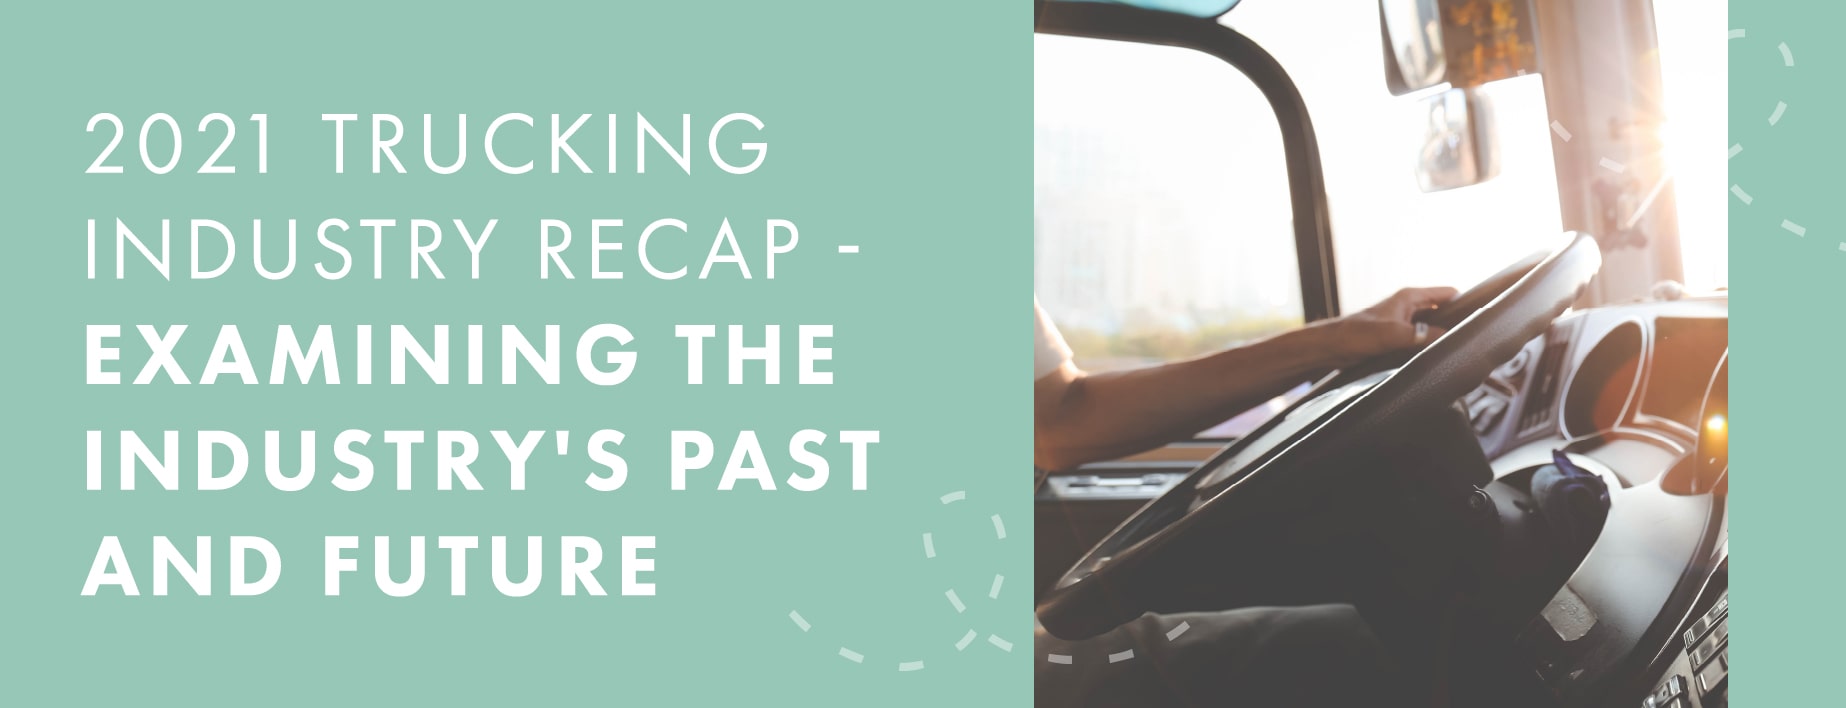 2021 Trucking Industry Recap – Examining the Industry’s Past and Future